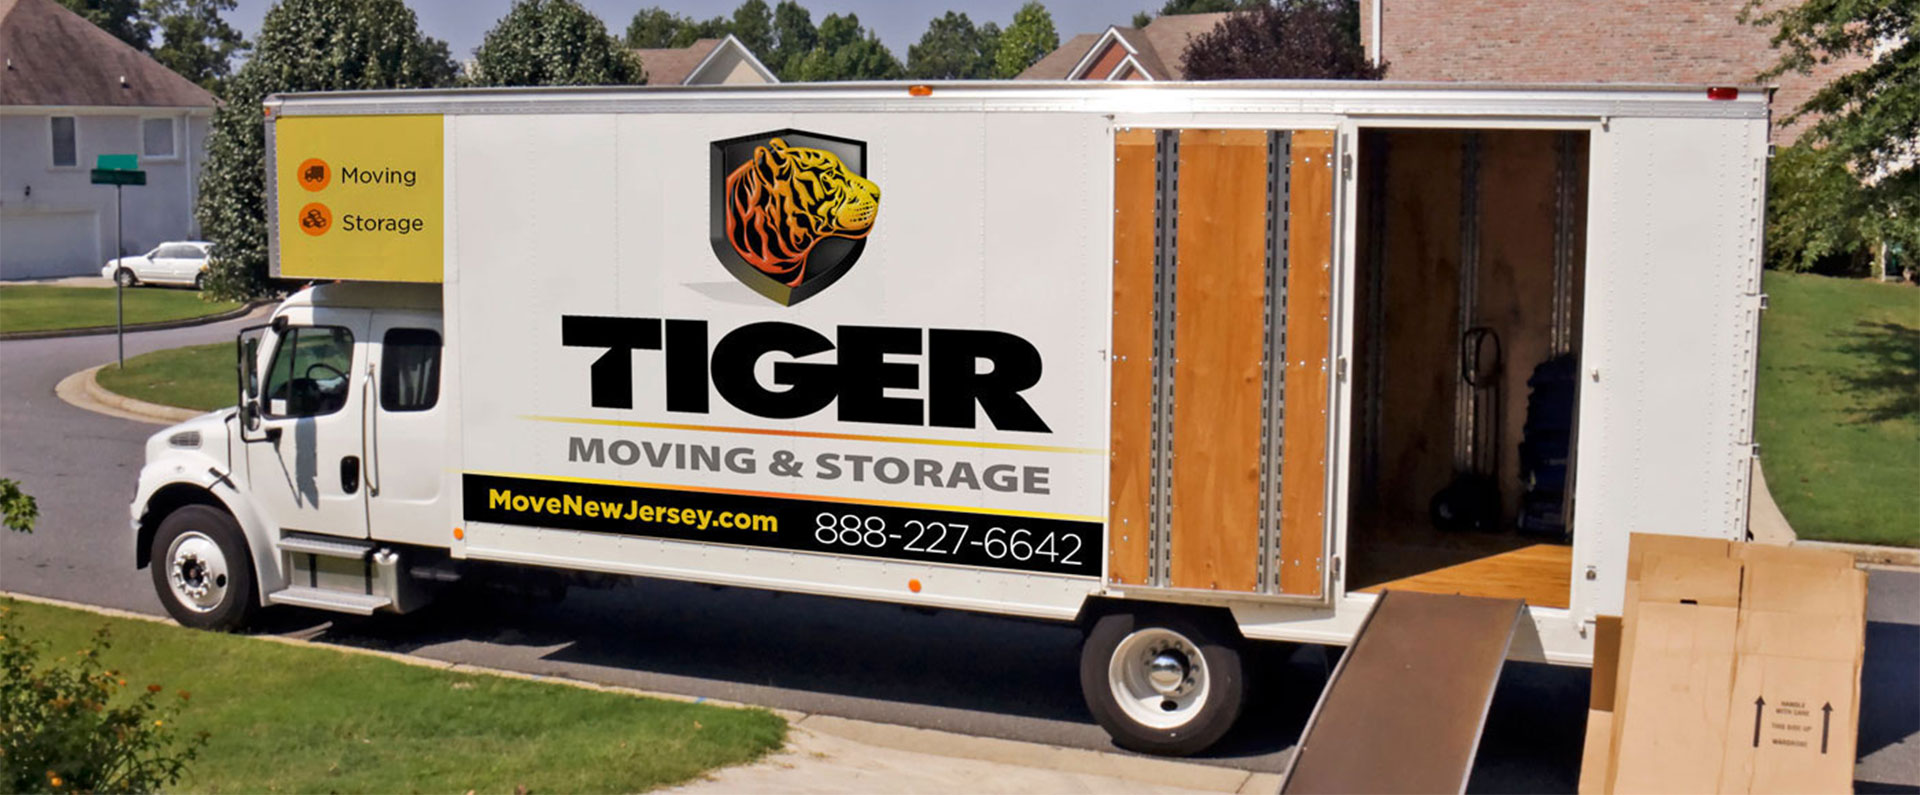 Moving On A Budget 6 Tips From Your Local Nj Residential Movers